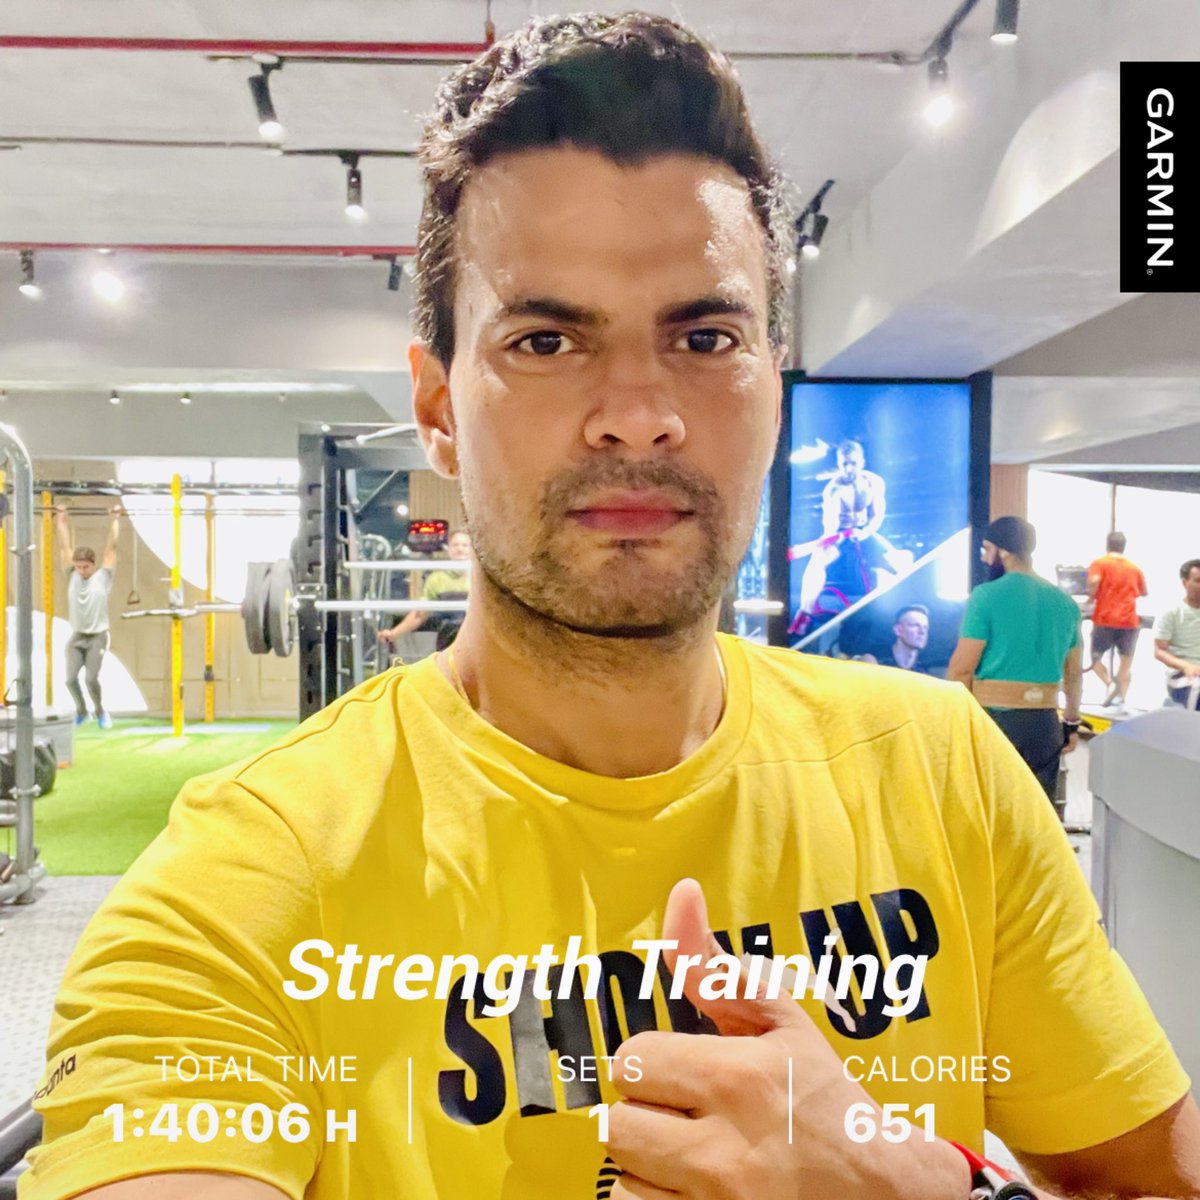 After yesterday 20k Today was legs 🦵 day.Strength training is very important for running 🏃‍♂️ it helps you to run stronger without getting injured ..This was a missing link in my running journey but glad to add it this year #running #strengthtraining #workhard @FitIndiaOff